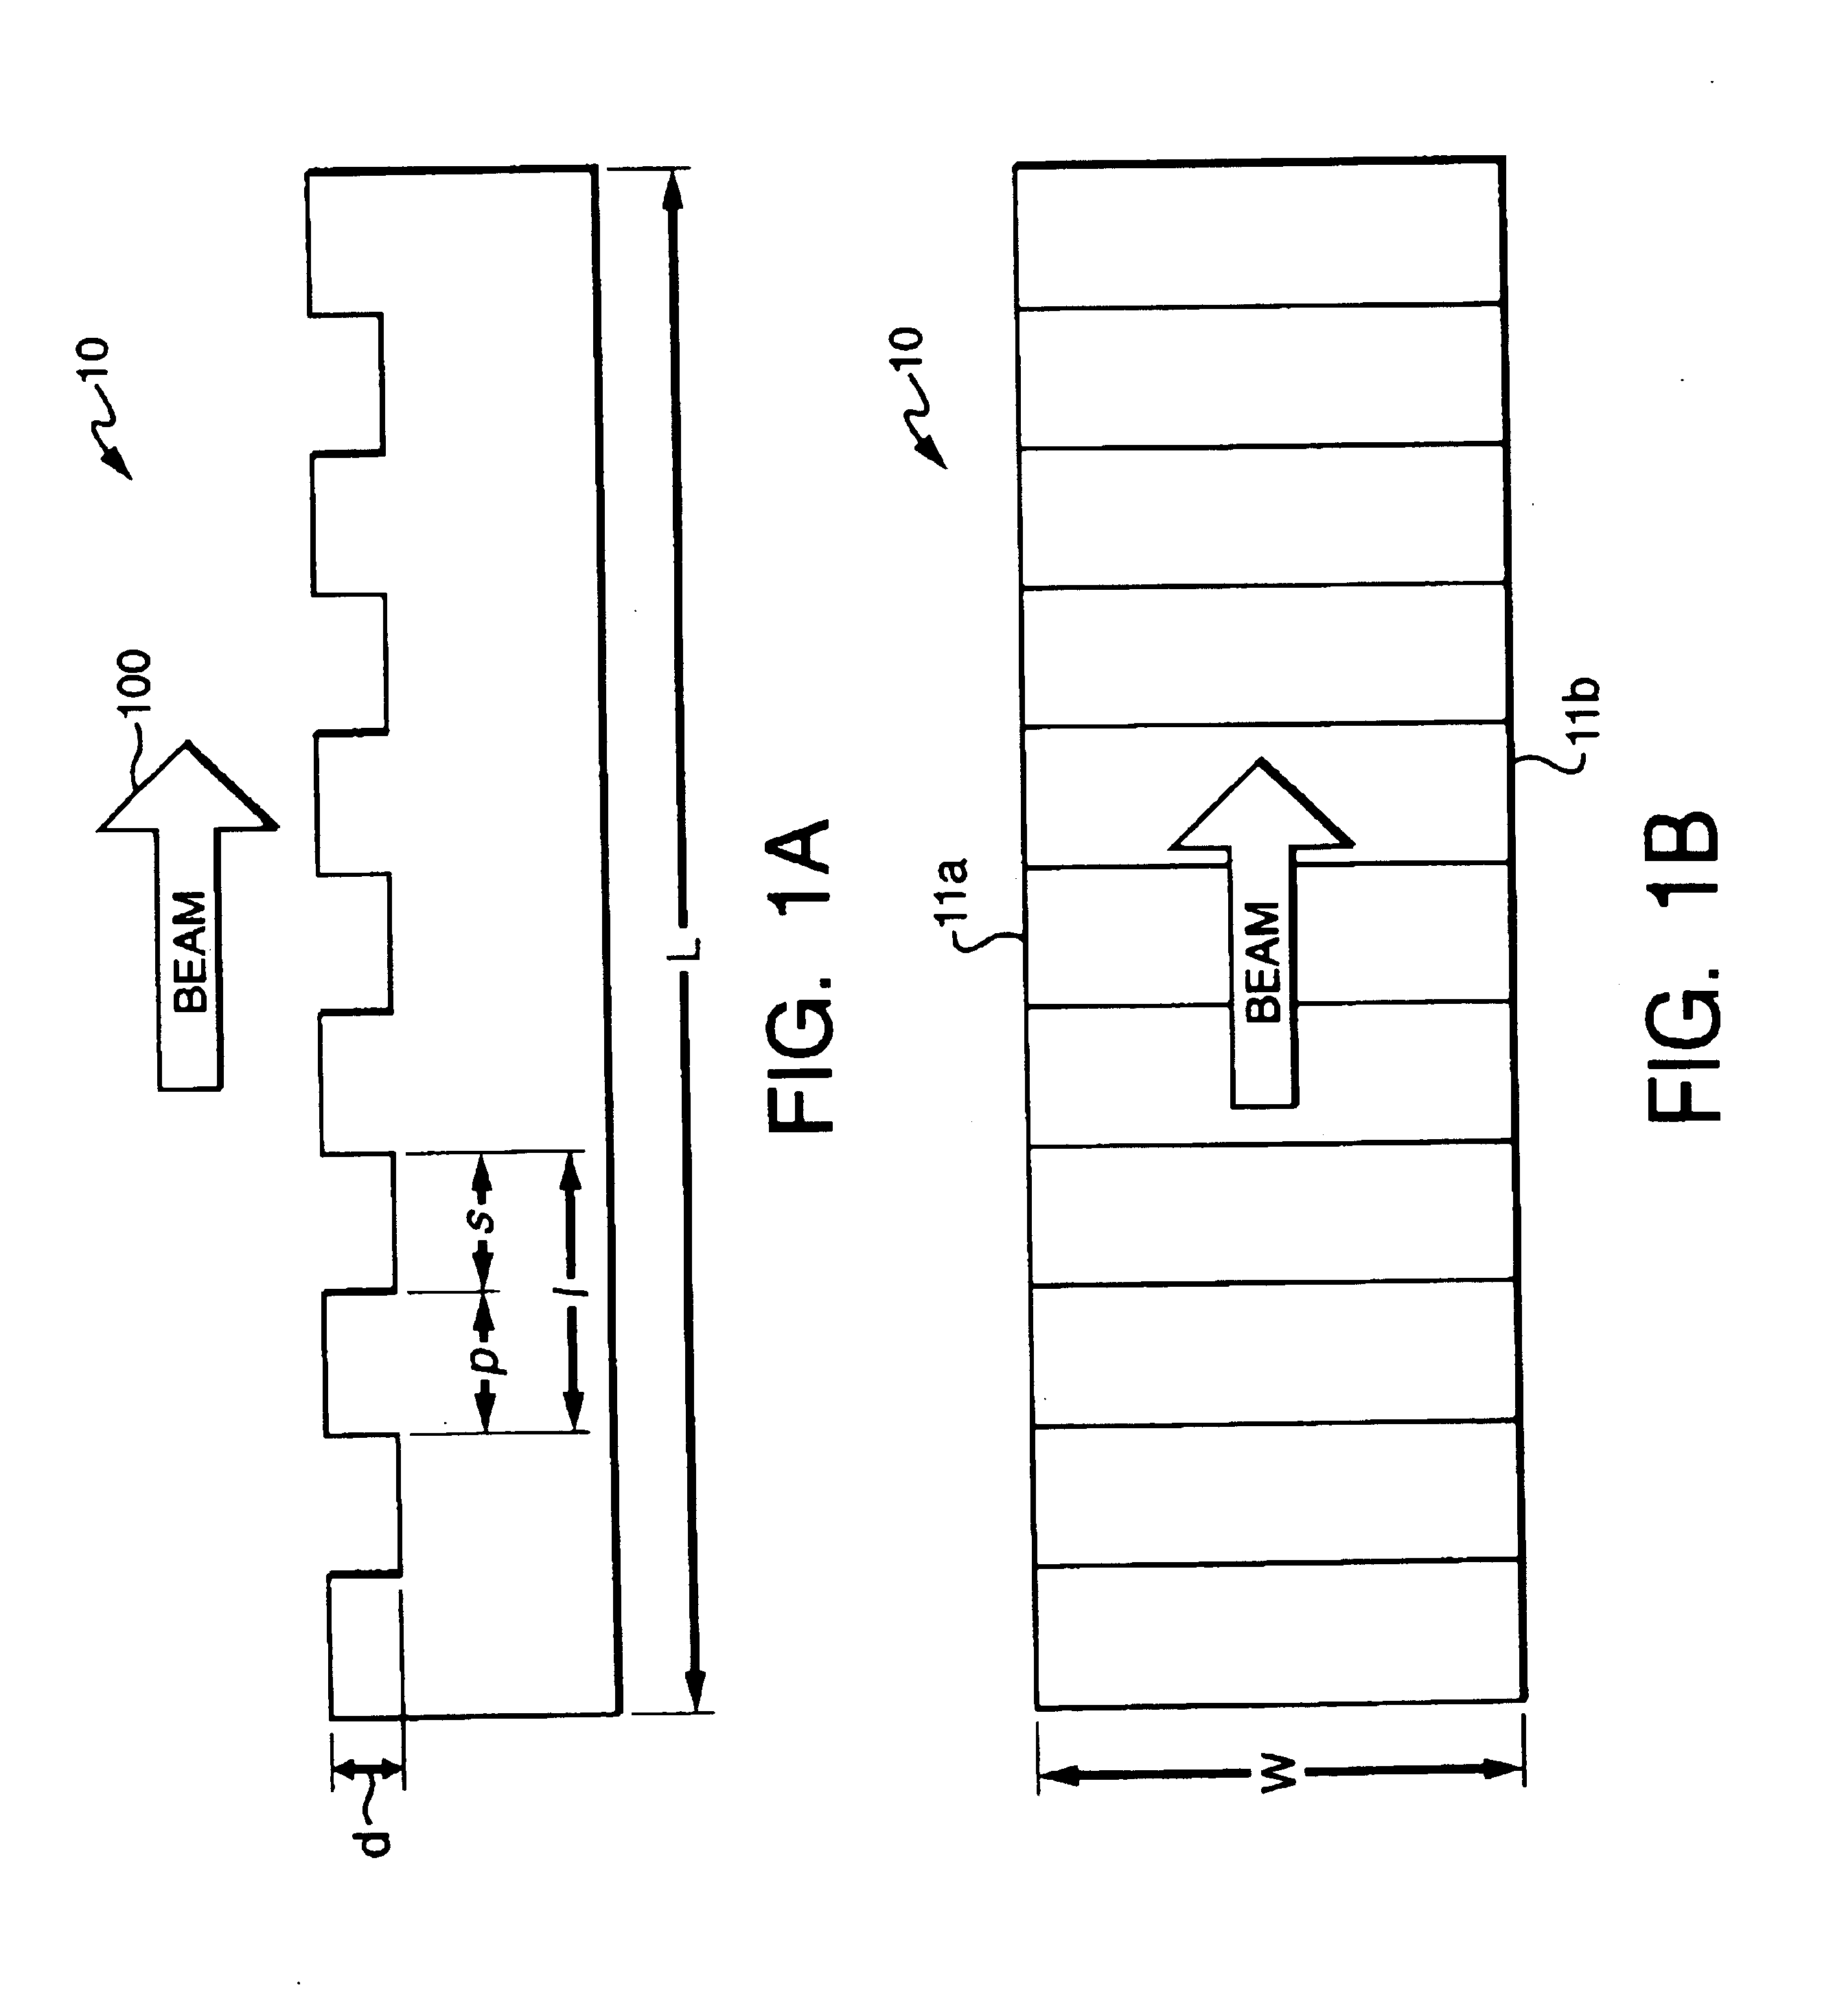 Apparatuses and methods for generating coherent electromagnetic laser radiation